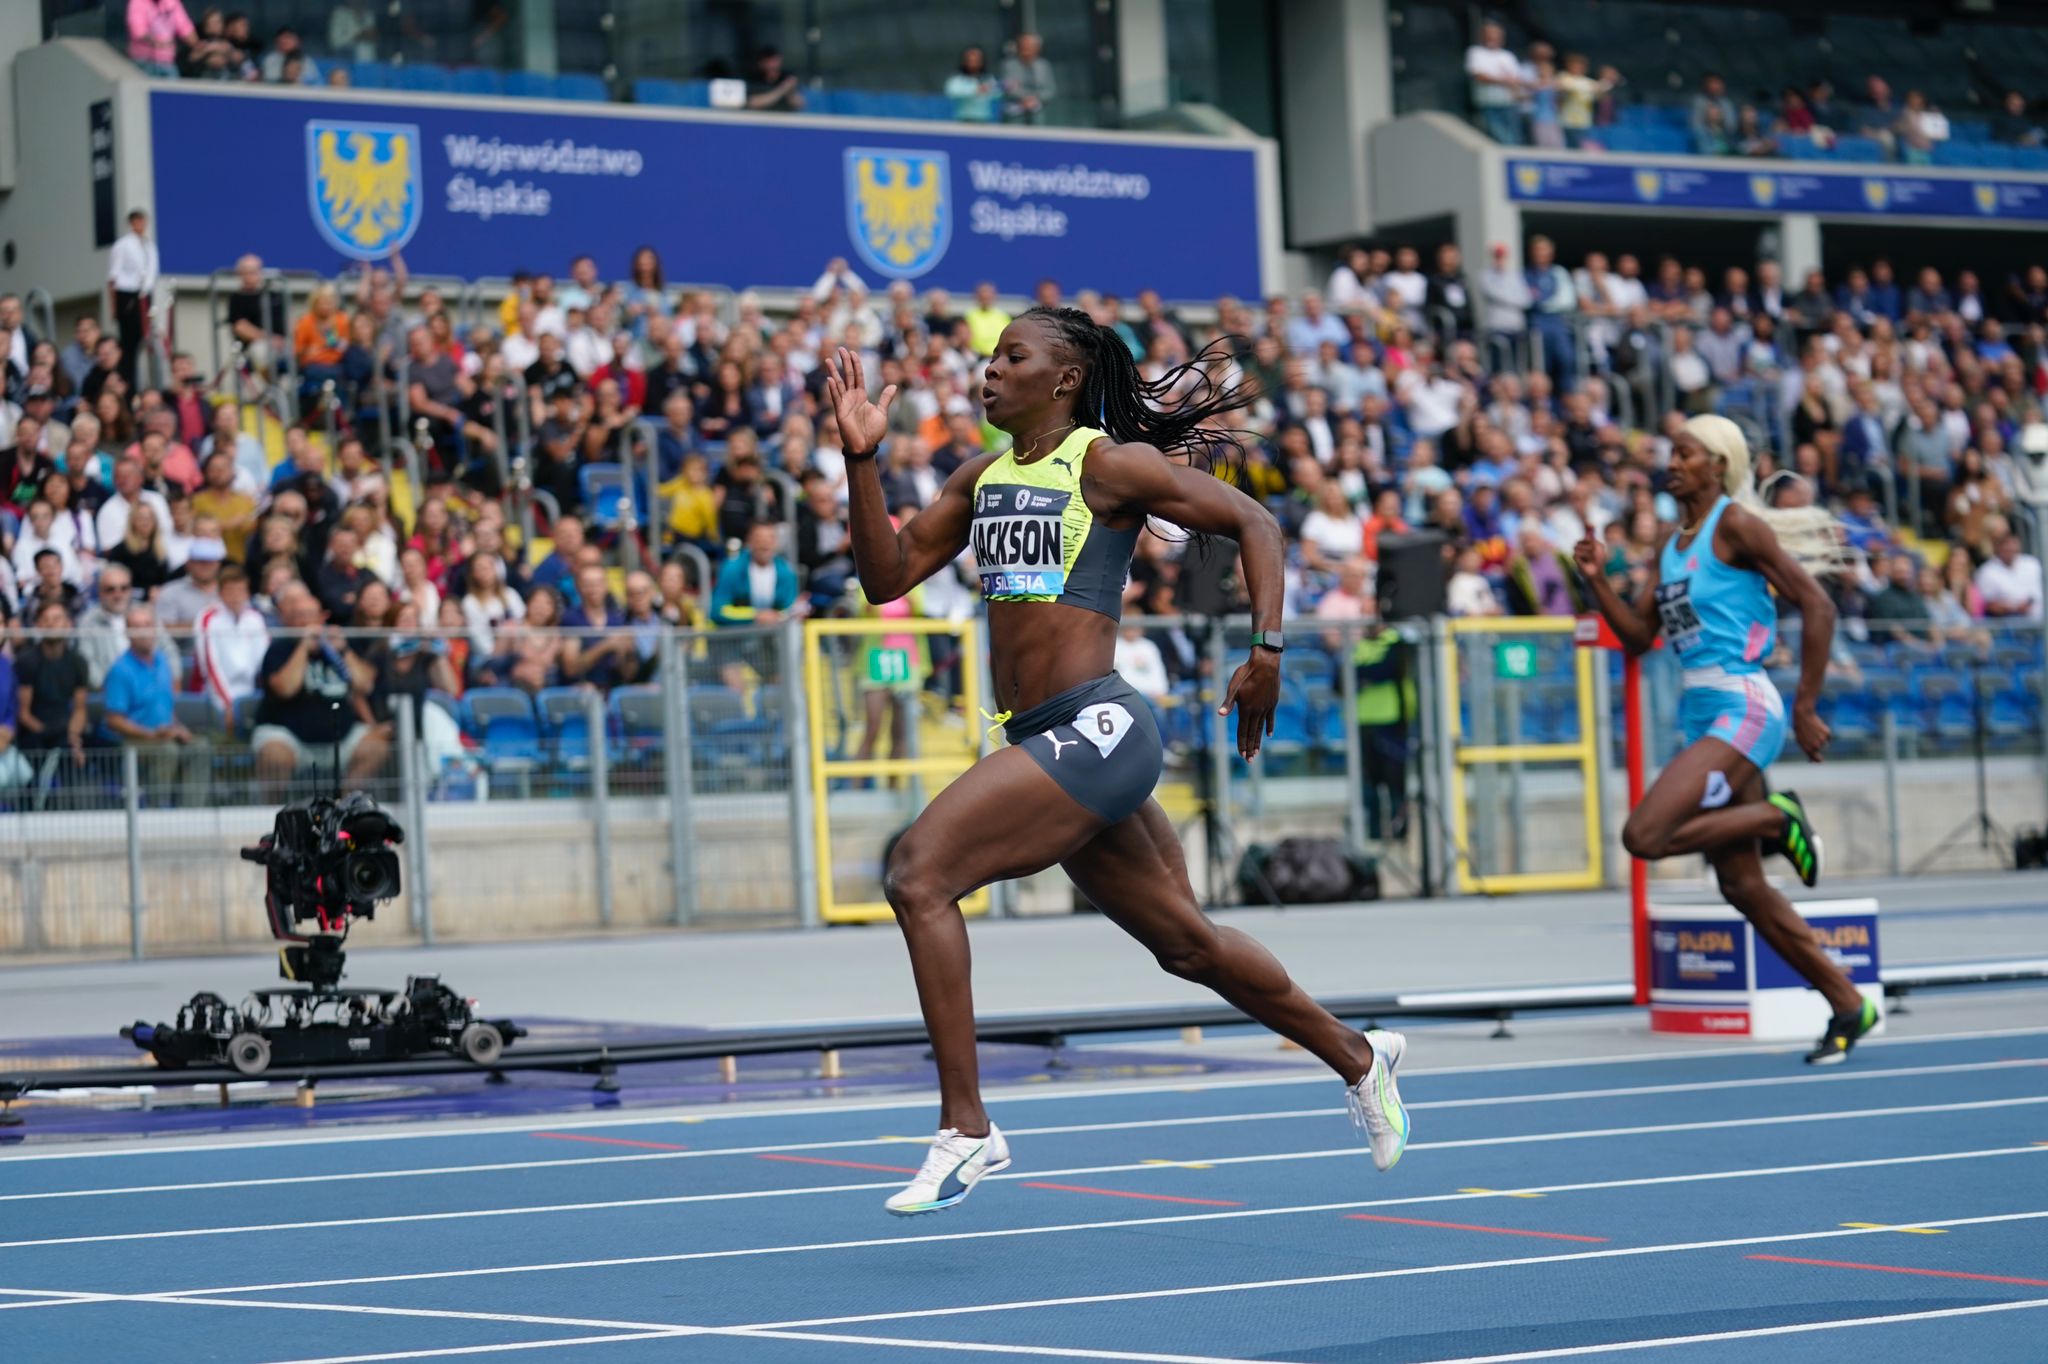 Shericka Jackson cements her status as favourite for the Diamond Trophy with an impressive win in the women’s 200m at the Silesia Diamond League.